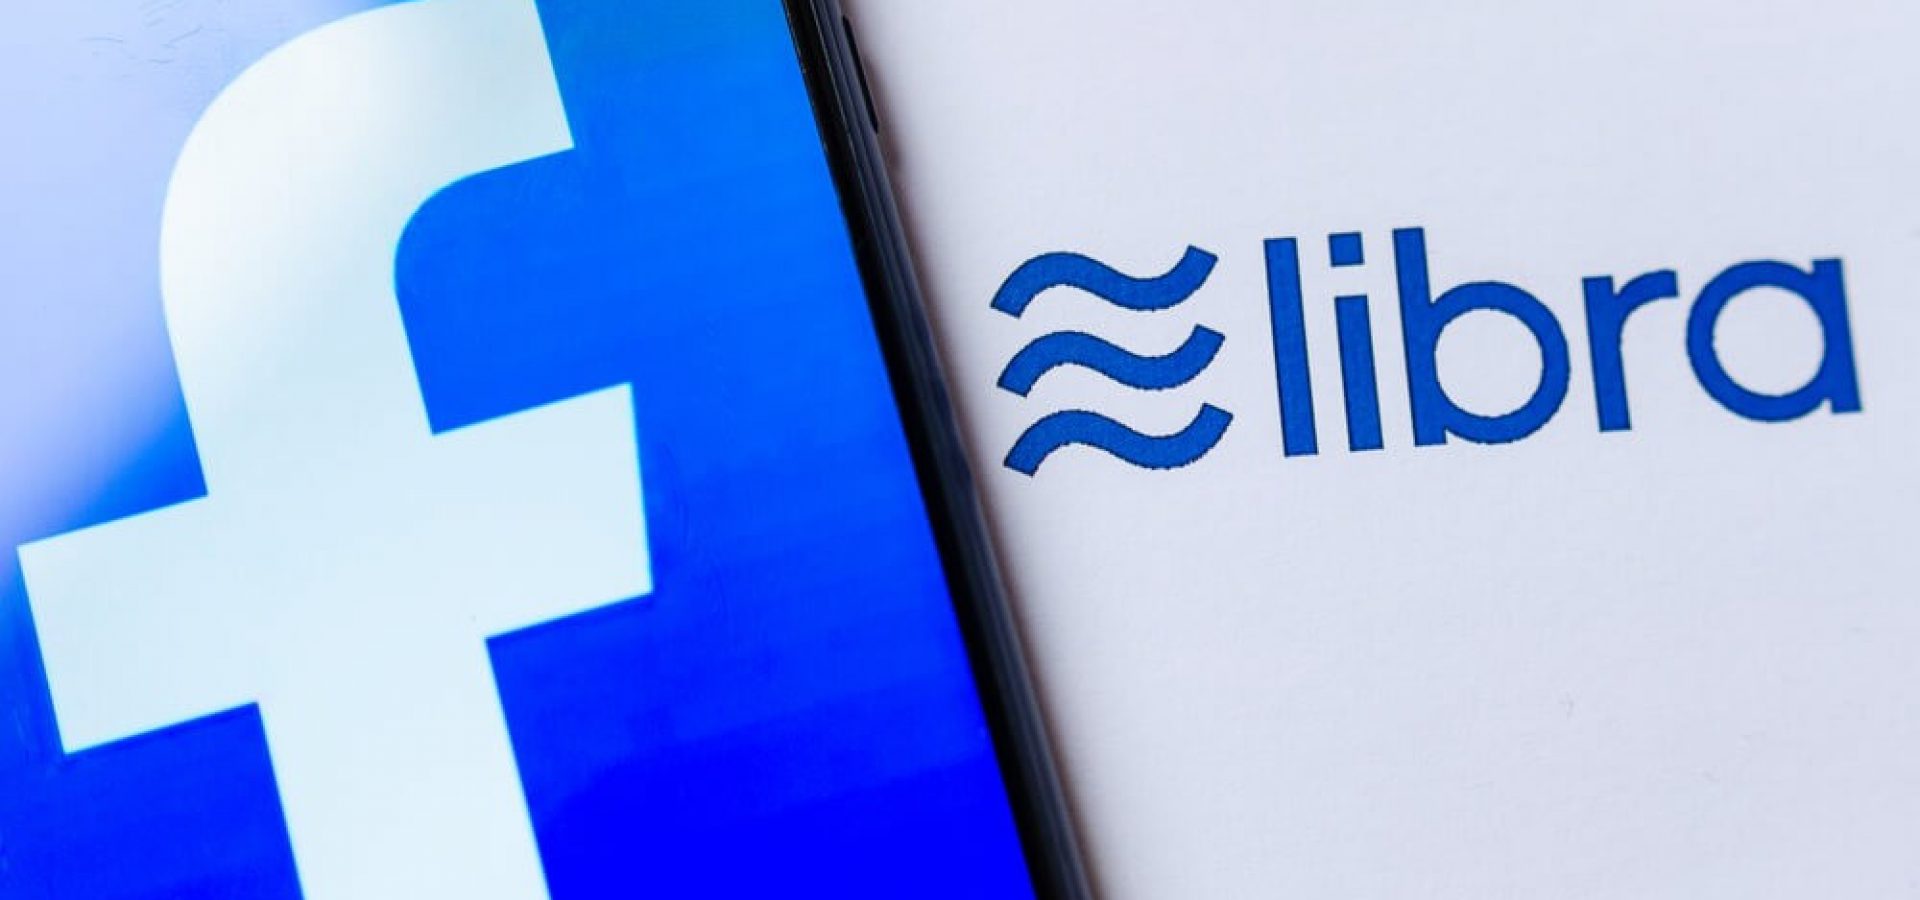 Wibest – Facebook Libra: Photo of the Facebook logo on the smartphone screen and the brochure with Libra logo.